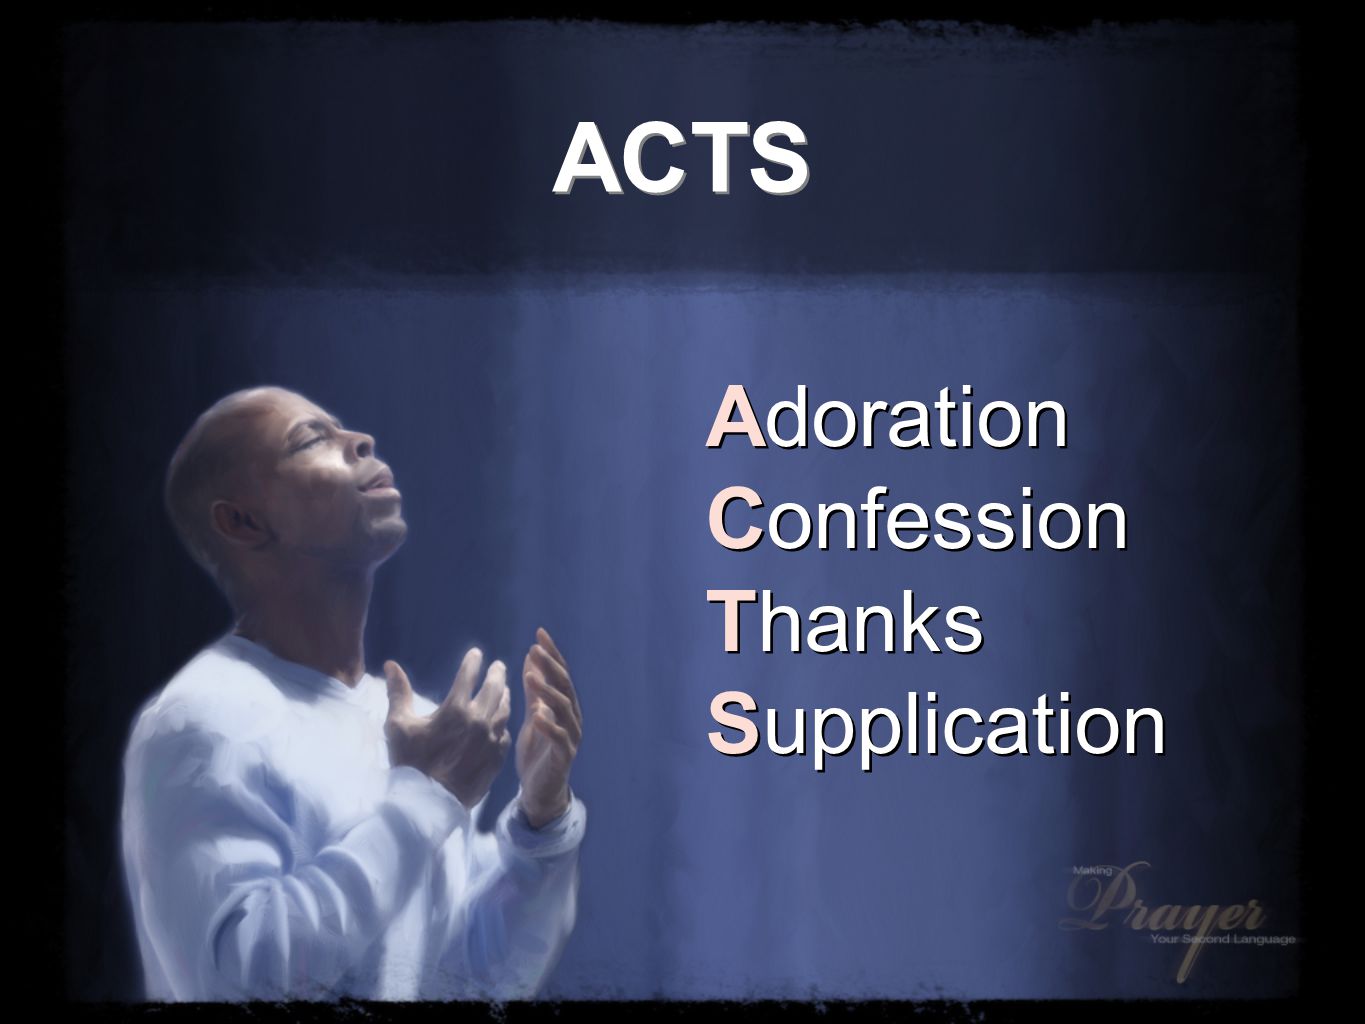 ACTS Adoration Confession Thanks Supplication Adoration Confession Thanks Supplication